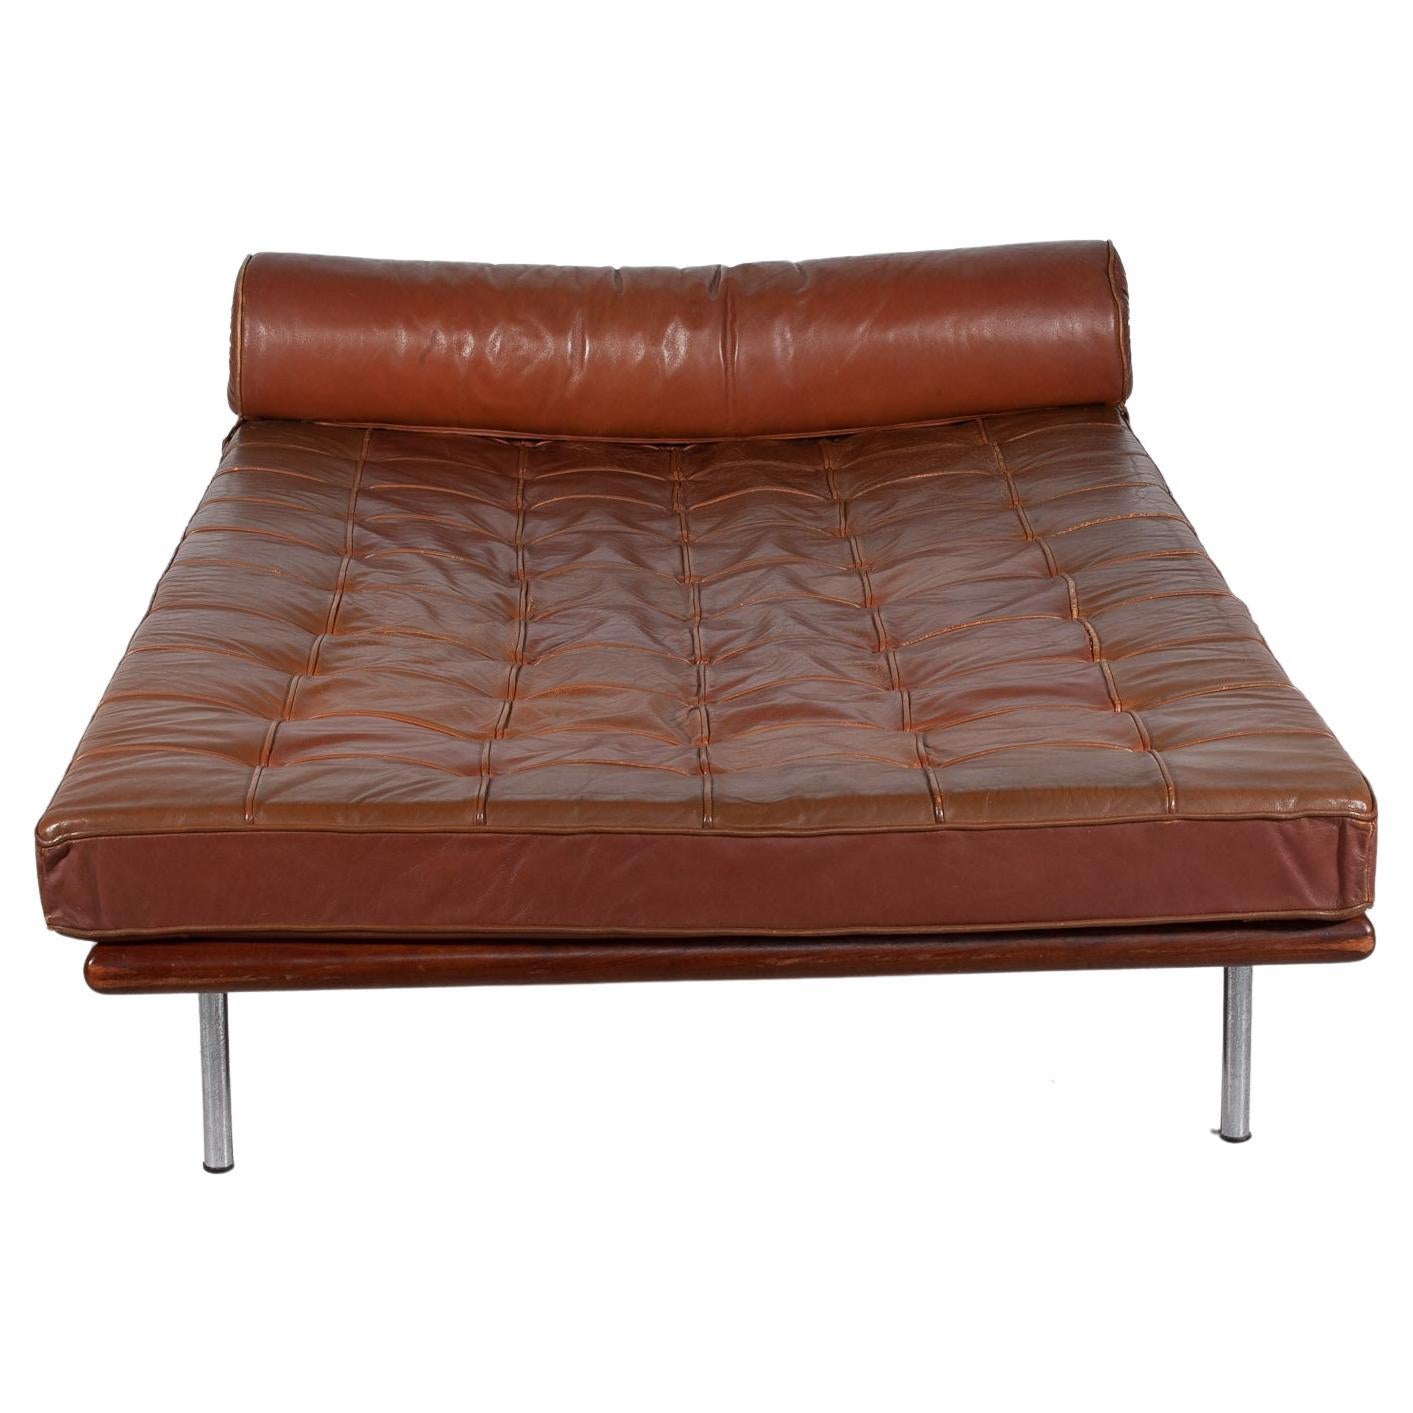 Brown Leather Barcelona Daybed by Ludwig Mies van der Rohe, für Knoll im Angebot